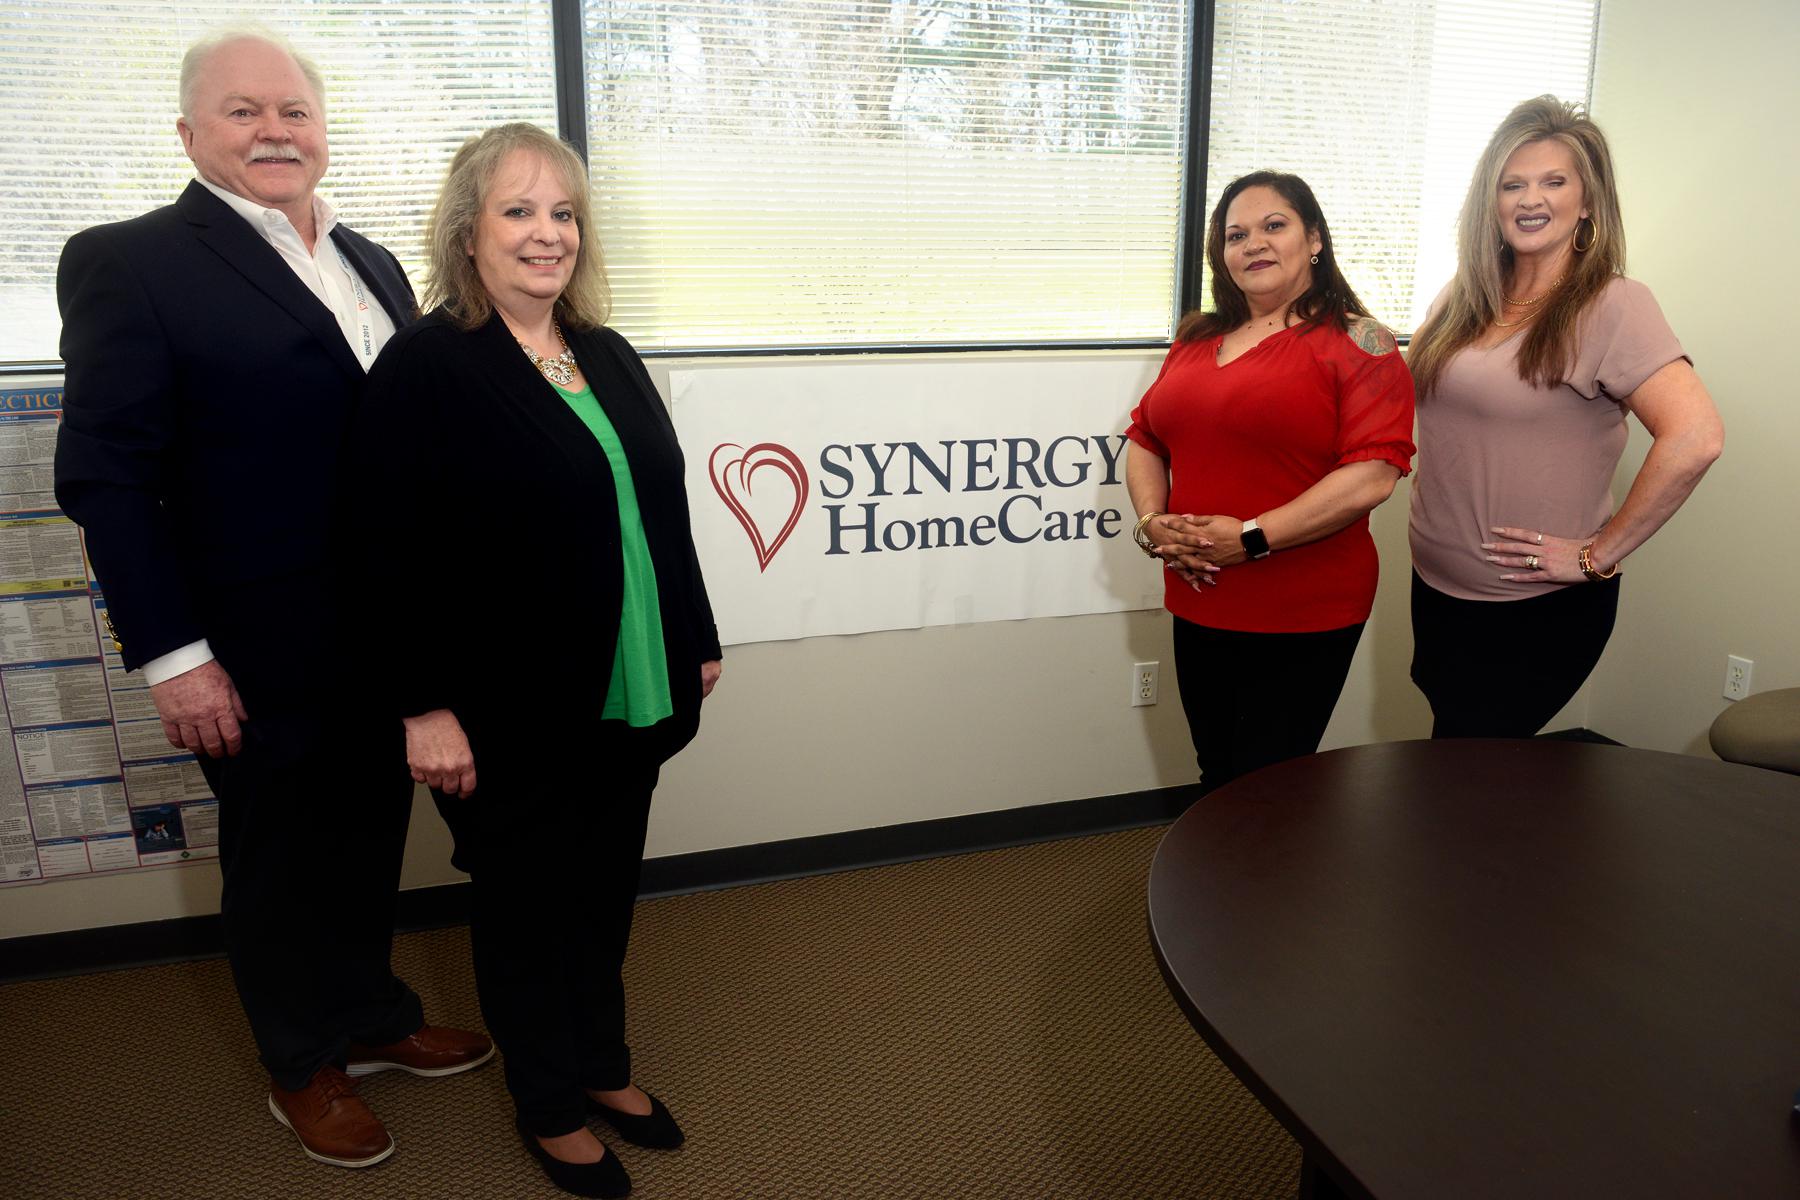 Home care provider latest business to move to Trumbull